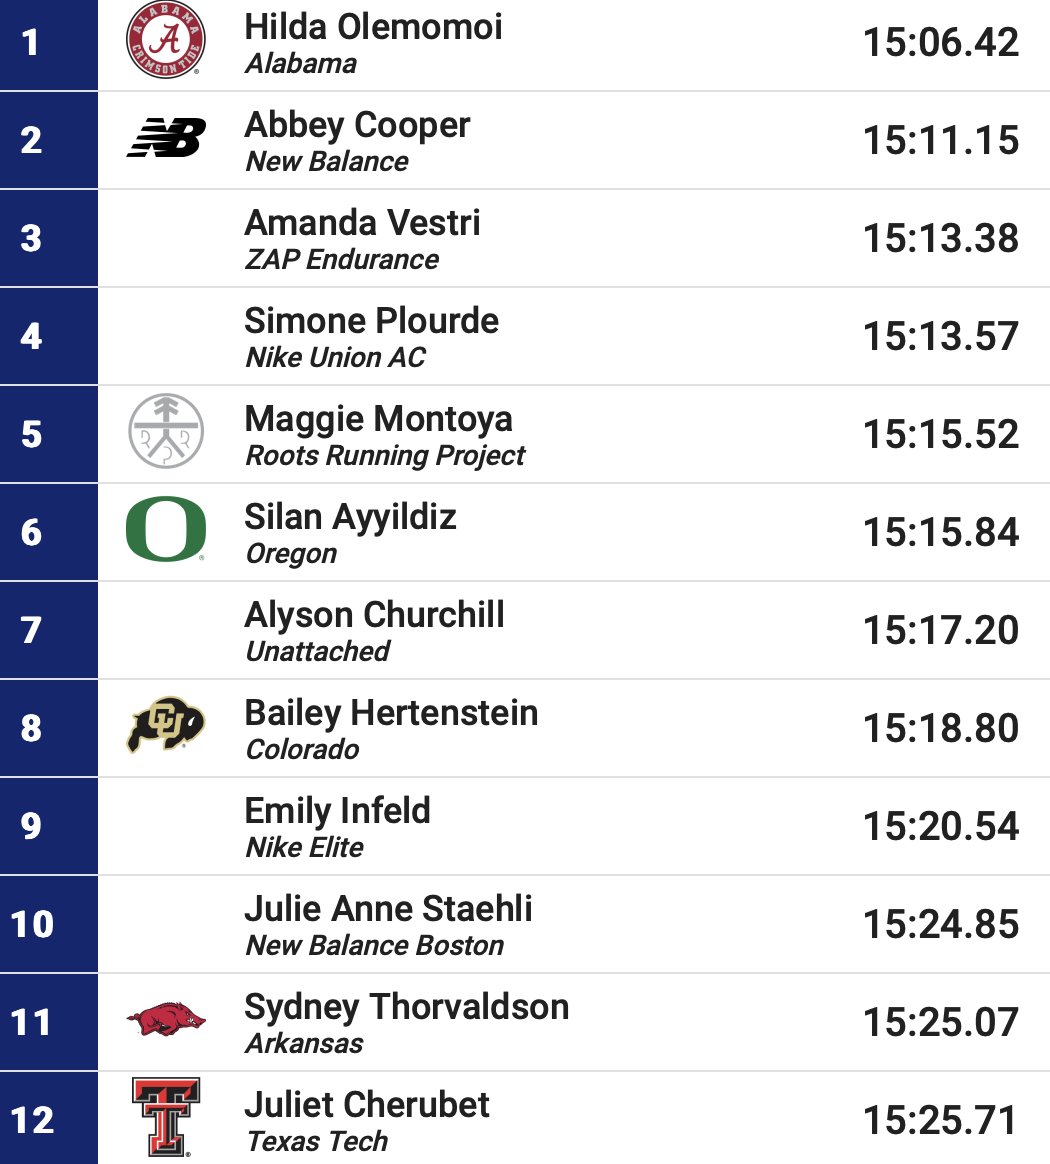 Lots of fast 5,000m running at the Bryan Clay Invitational. Alabama's Hilda Olemomoi led the way in 15:06.42, which makes her the second-fastest collegian ever outdoors, behind only Katelyn Tuohy. 59 women broke 16:00 last night. More results here: finishedresults.trackscoreboard.com/meets/11836/ev…